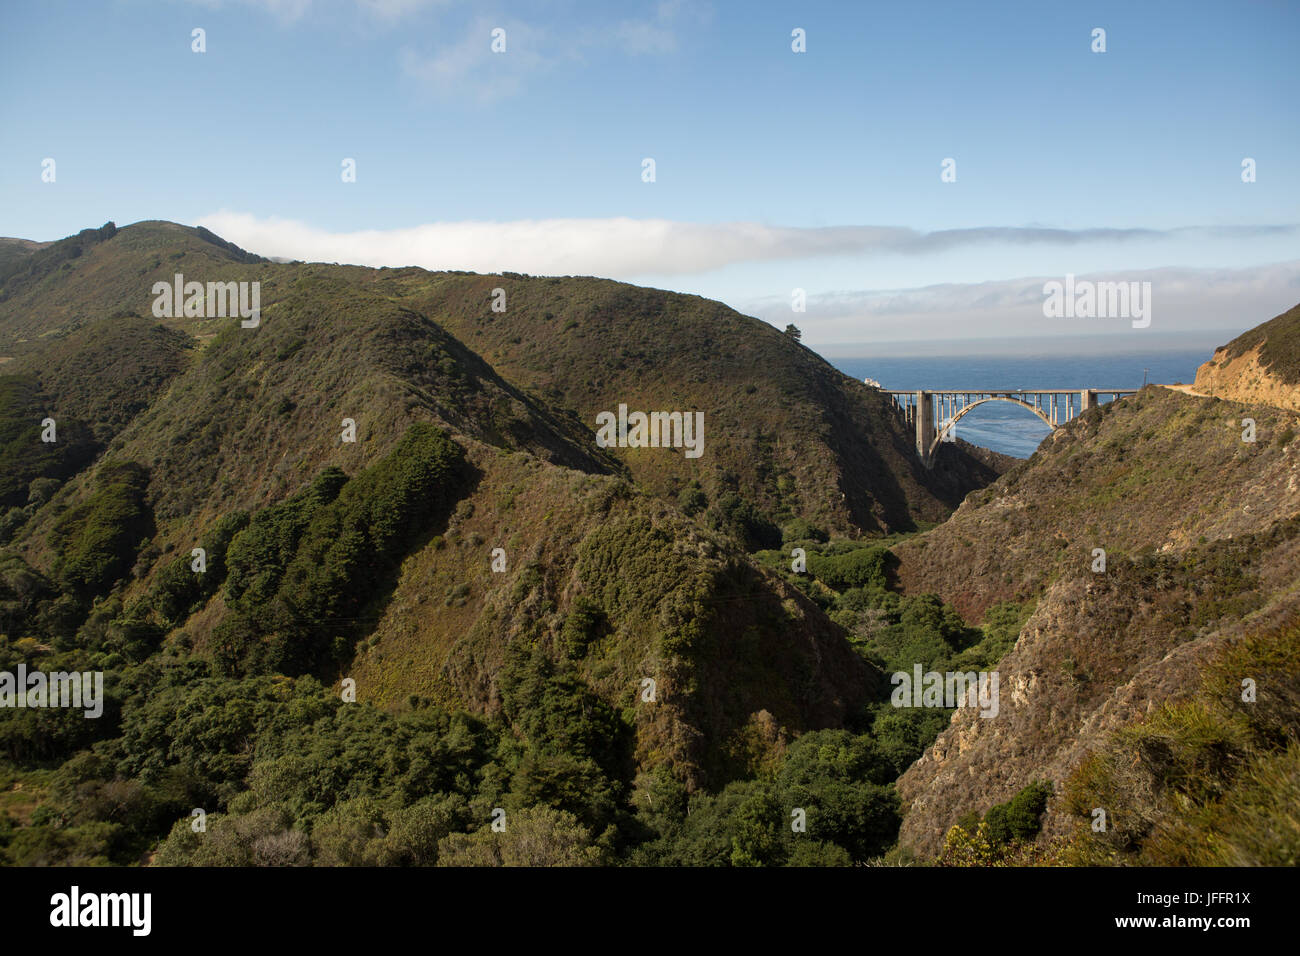 A scenic view of the Bixby Creek Bridge, a concrete, open-spandrel arch bridge, on the Pacific Coast Highway, and nearby mountains. Stock Photo